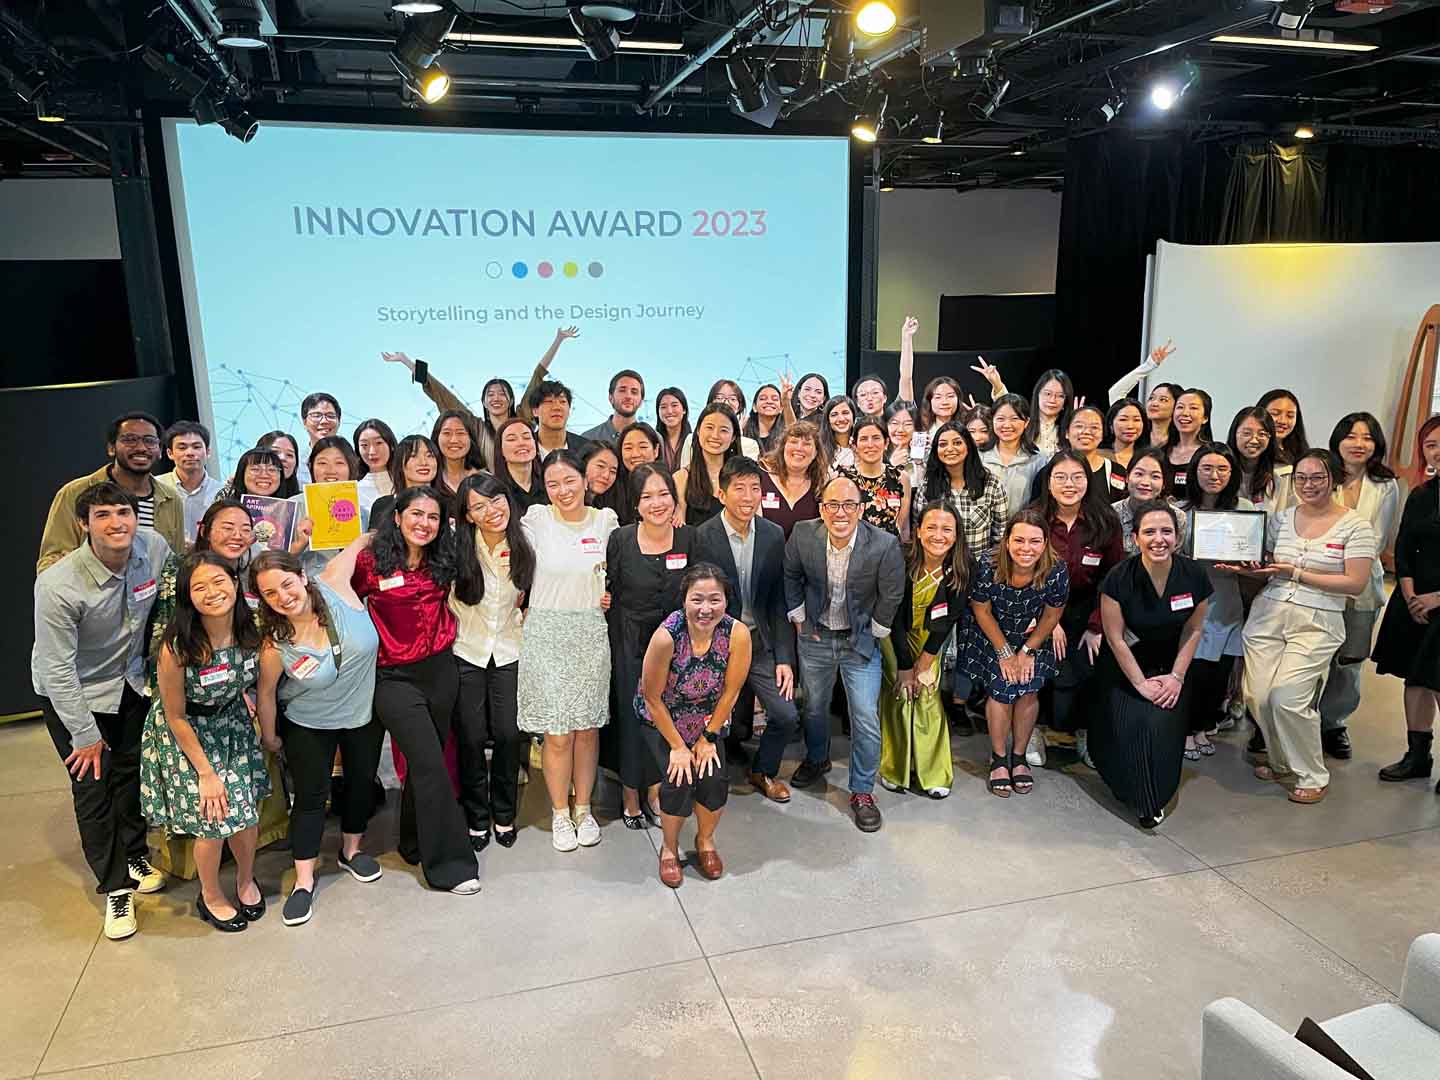 A group photo of all 2023 Innovation Award participants, judges, and professors.